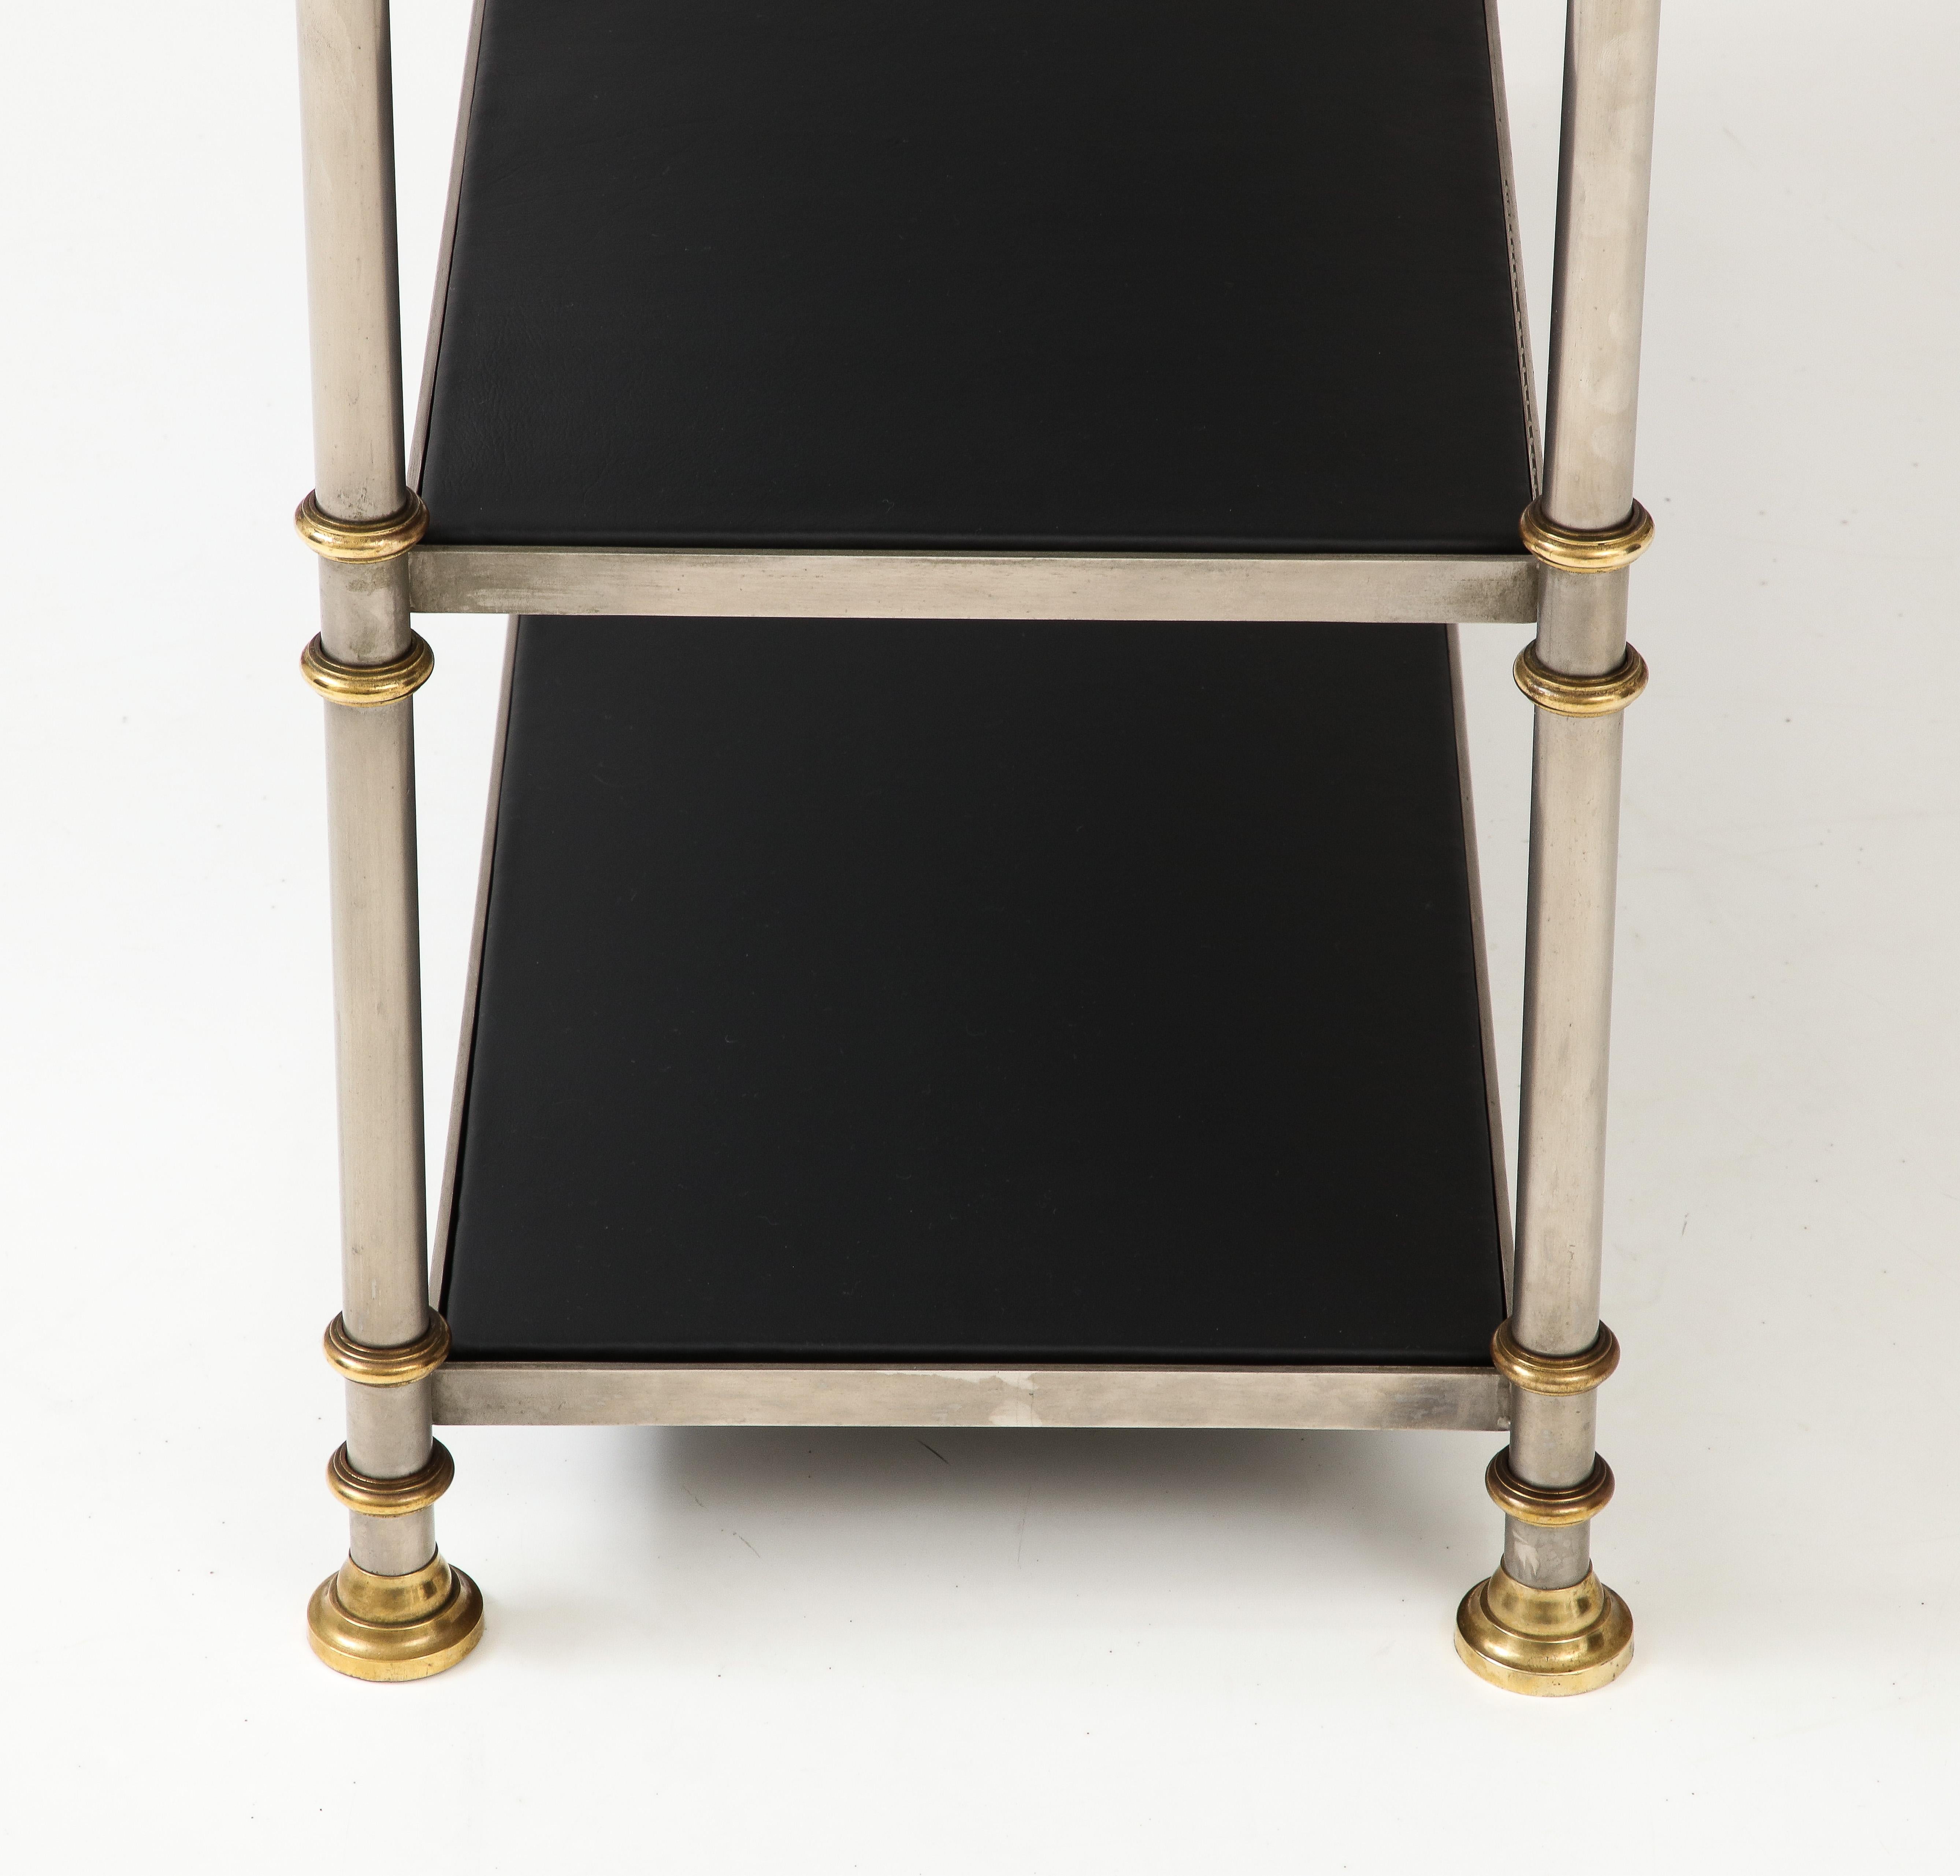 Italian Maison Jansen Attributed Steel And Brass Etagere With Leather Shelves